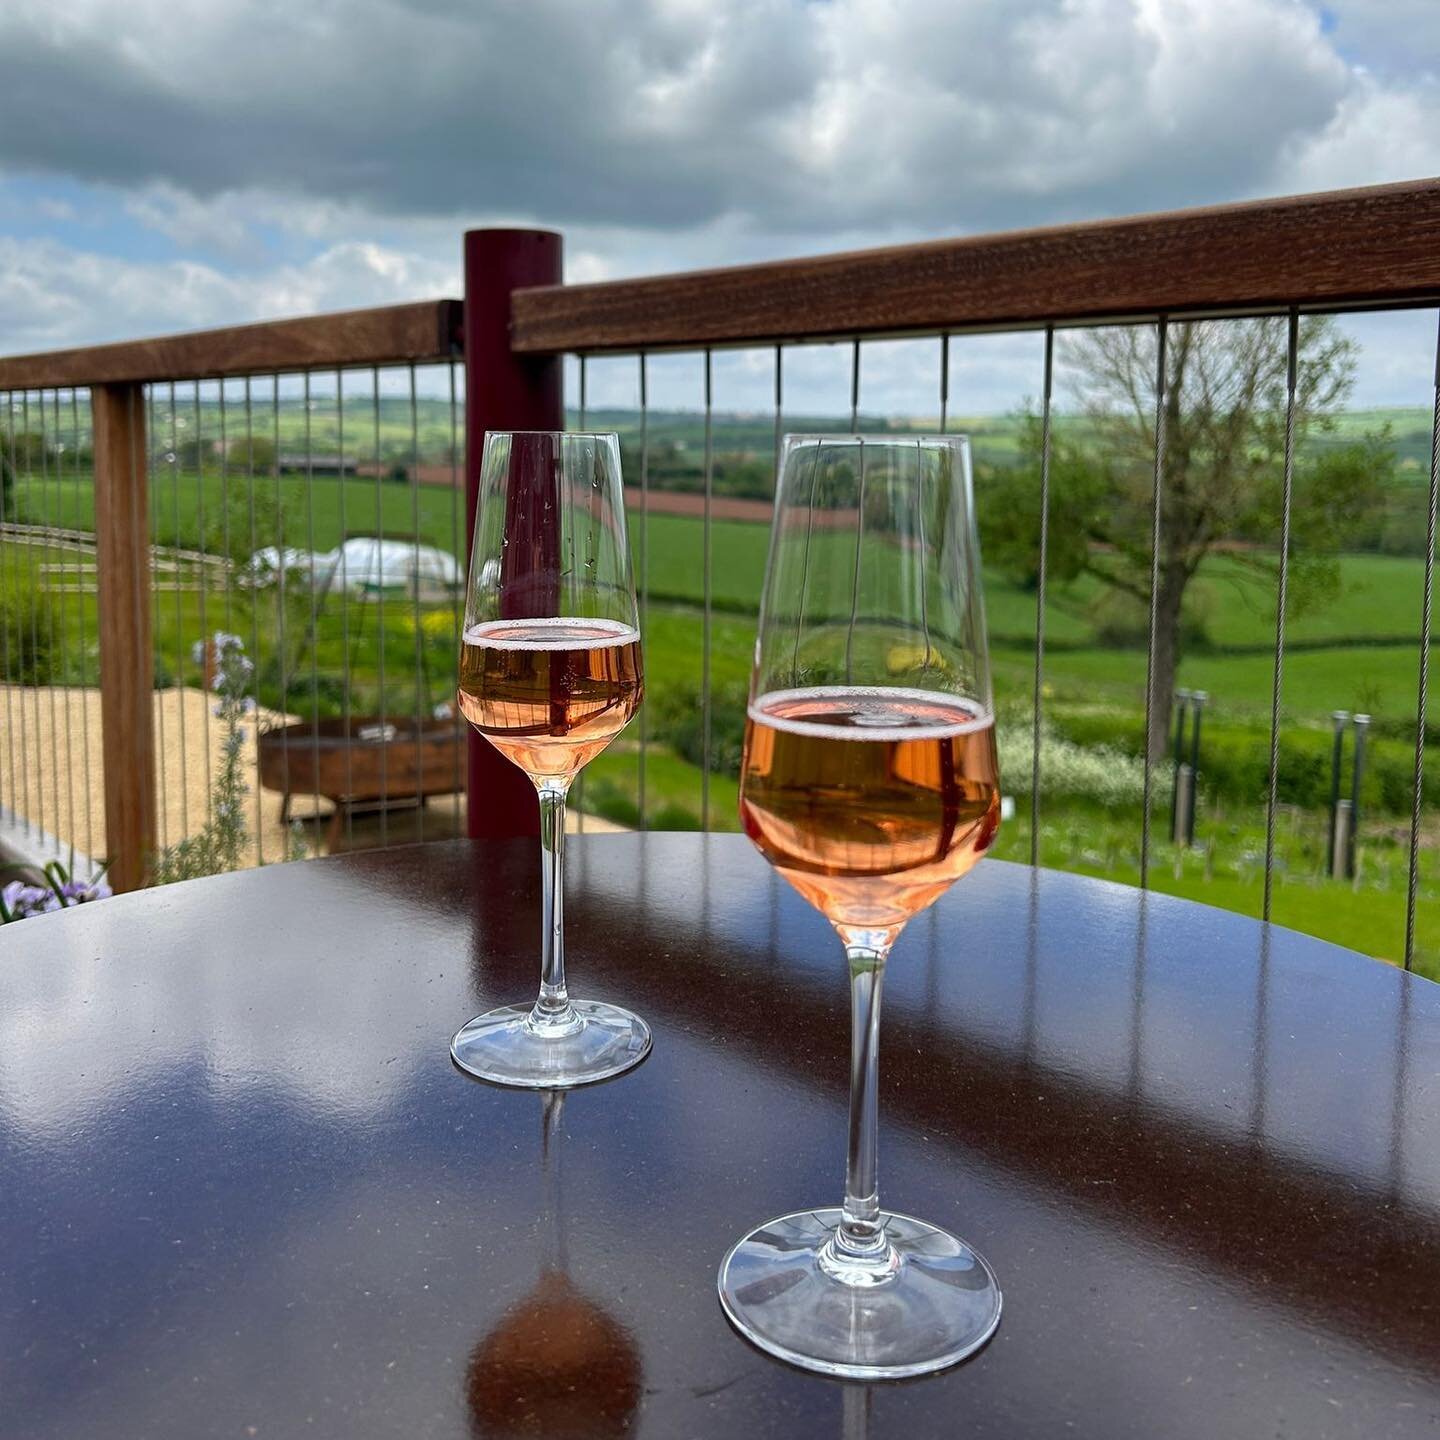 Friday drinks on the terrace anyone?

Join us for some drinks and snacks and enjoy the view of chew! Fancy something a bit more we have a few spaces left for dining also for an impromptu Friday dinner! 

#somersetfoodie #bristolfoodie #bristol #chewv